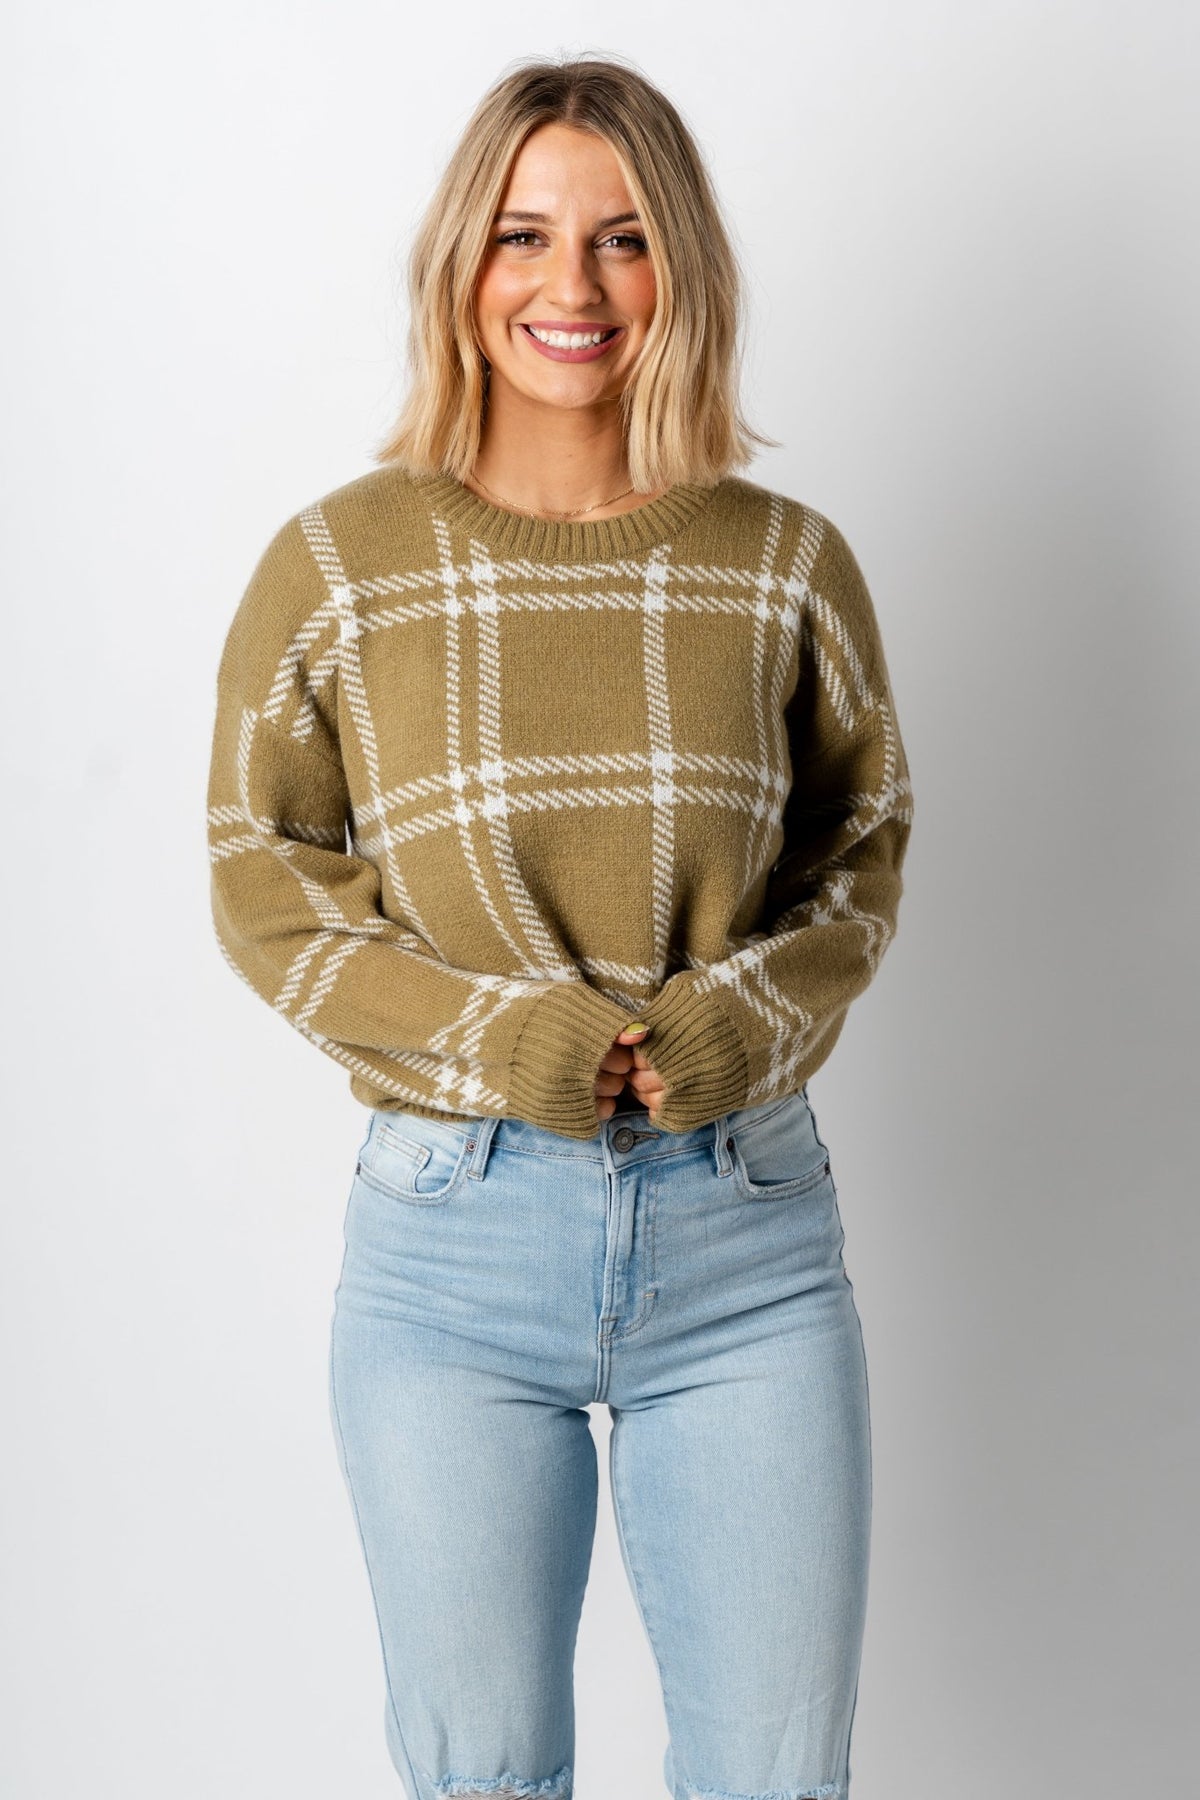 Z Supply Jolene plaid sweater ivy - Z Supply Sweaters - Z Supply Tops, Dresses, Tanks, Tees, Cardigans, Joggers and Loungewear at Lush Fashion Lounge